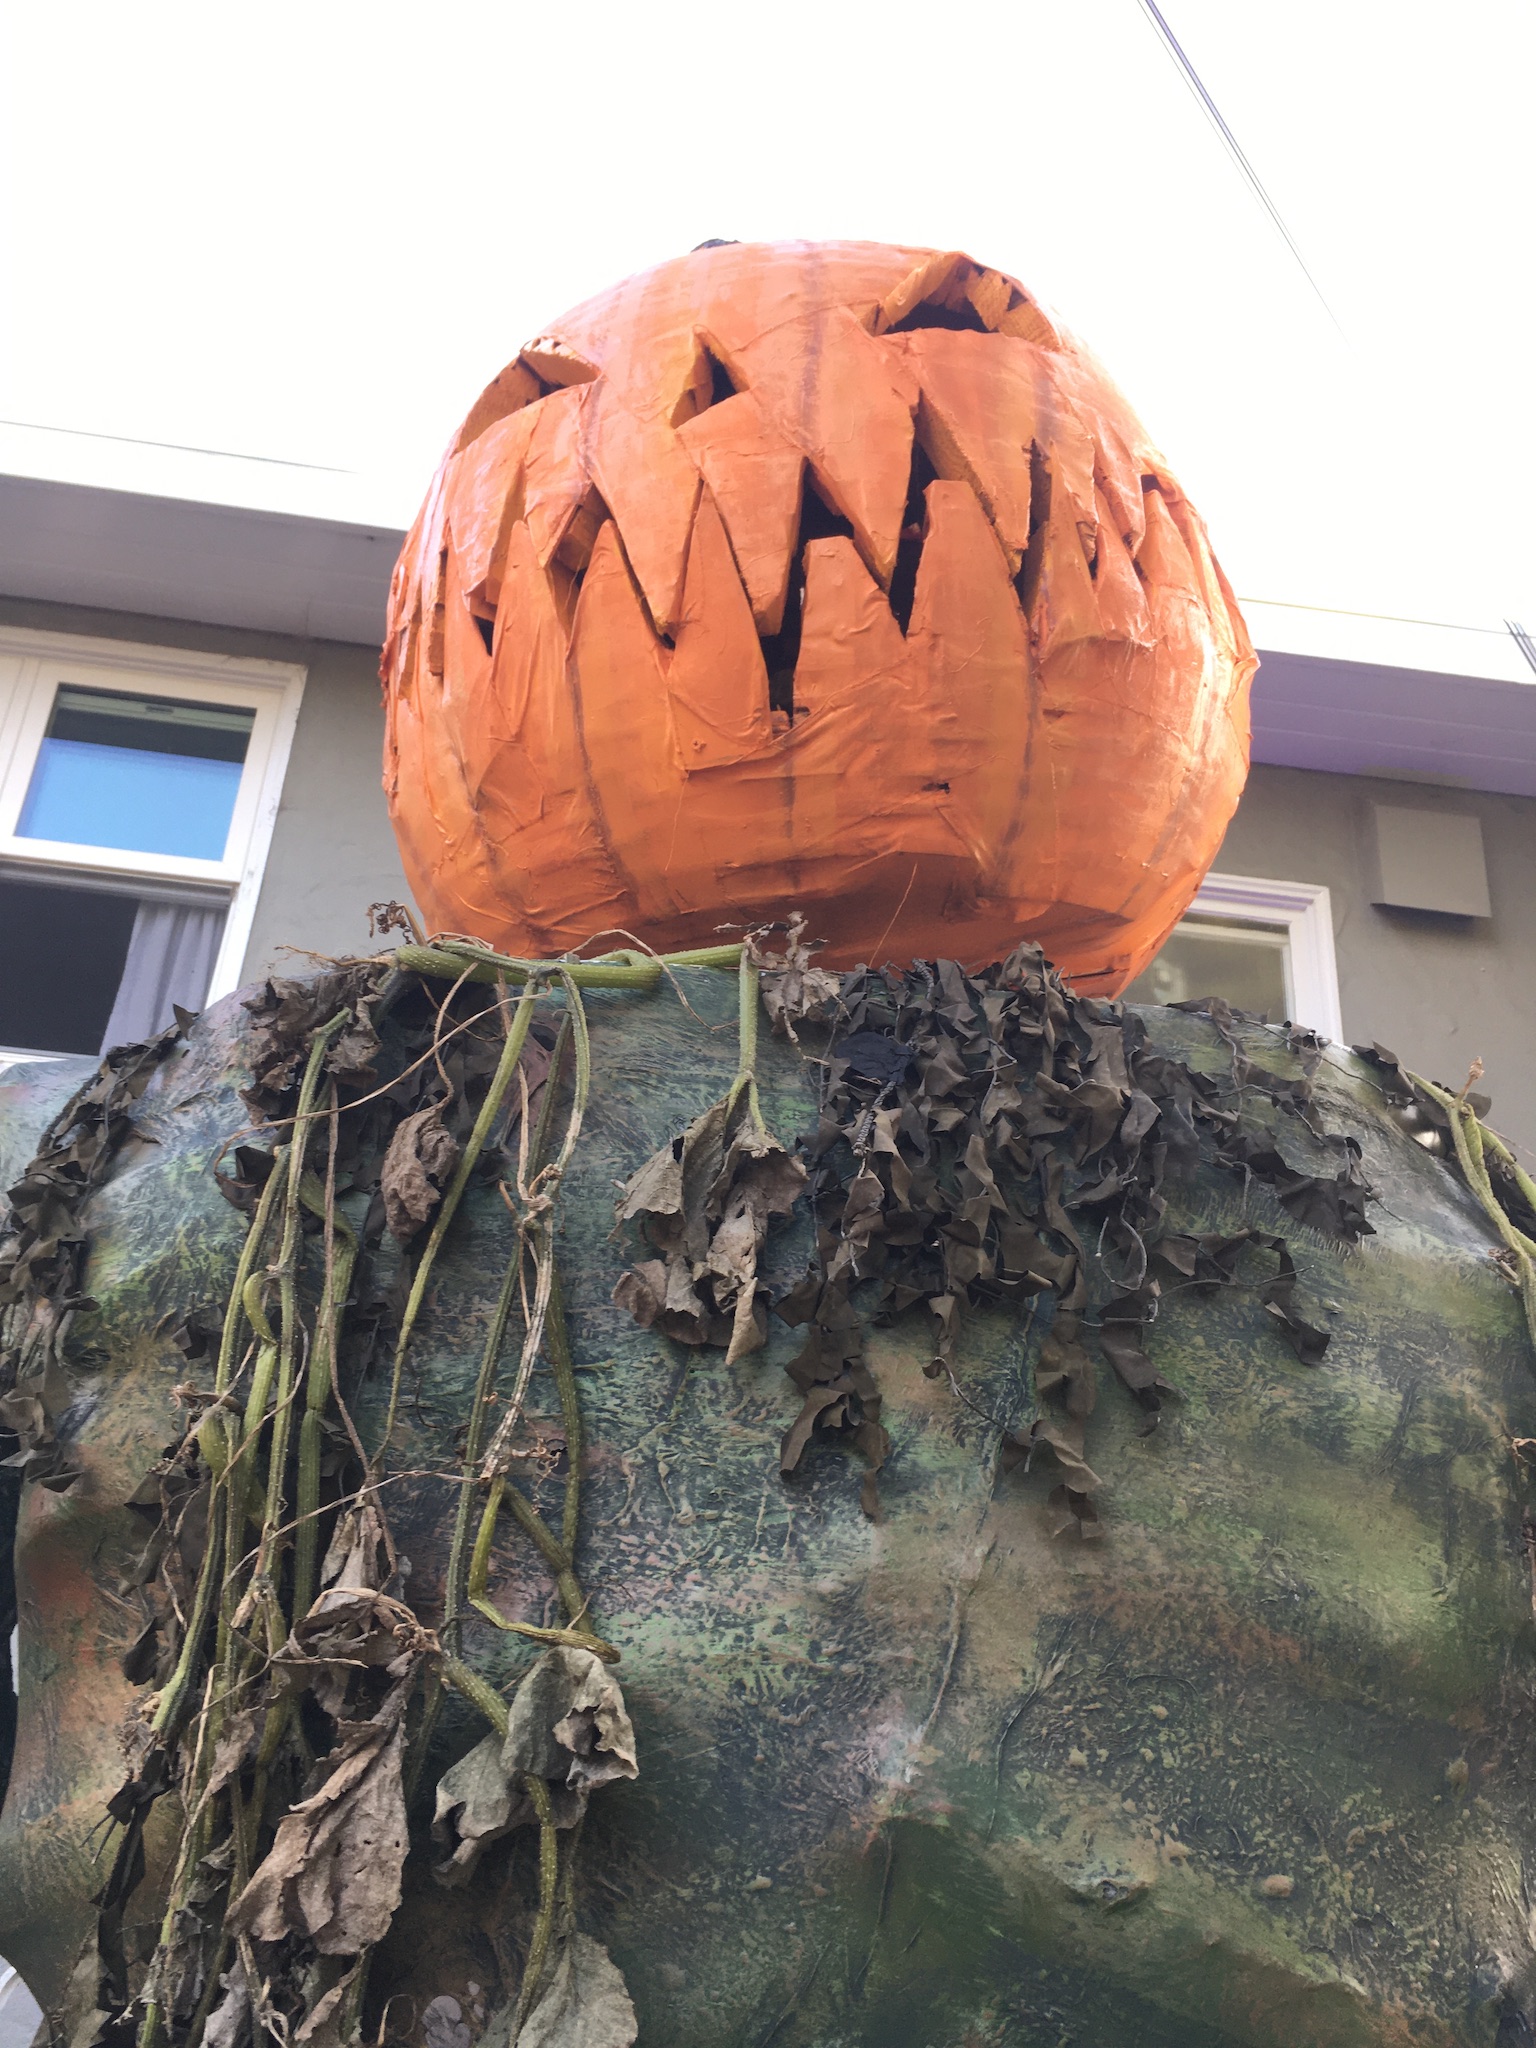 Painted Pumpkin Man draped in a mix of real and fake greenery